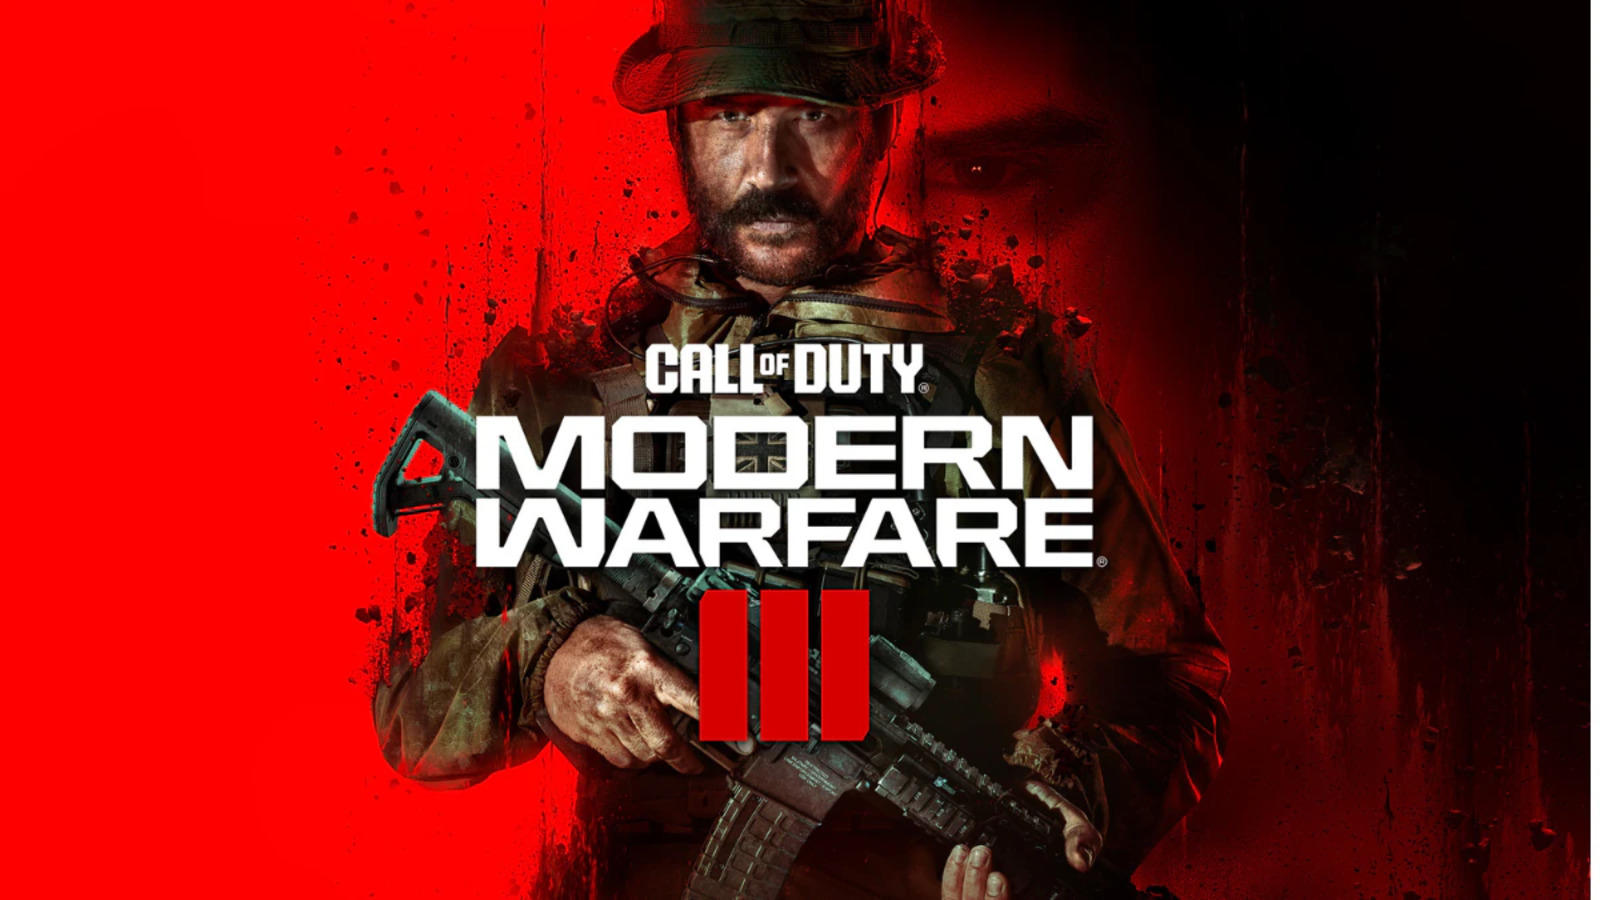 How to pre-load Modern Warfare 3 (MW3) campaign early access on PC Battle. net: Size, time, and more